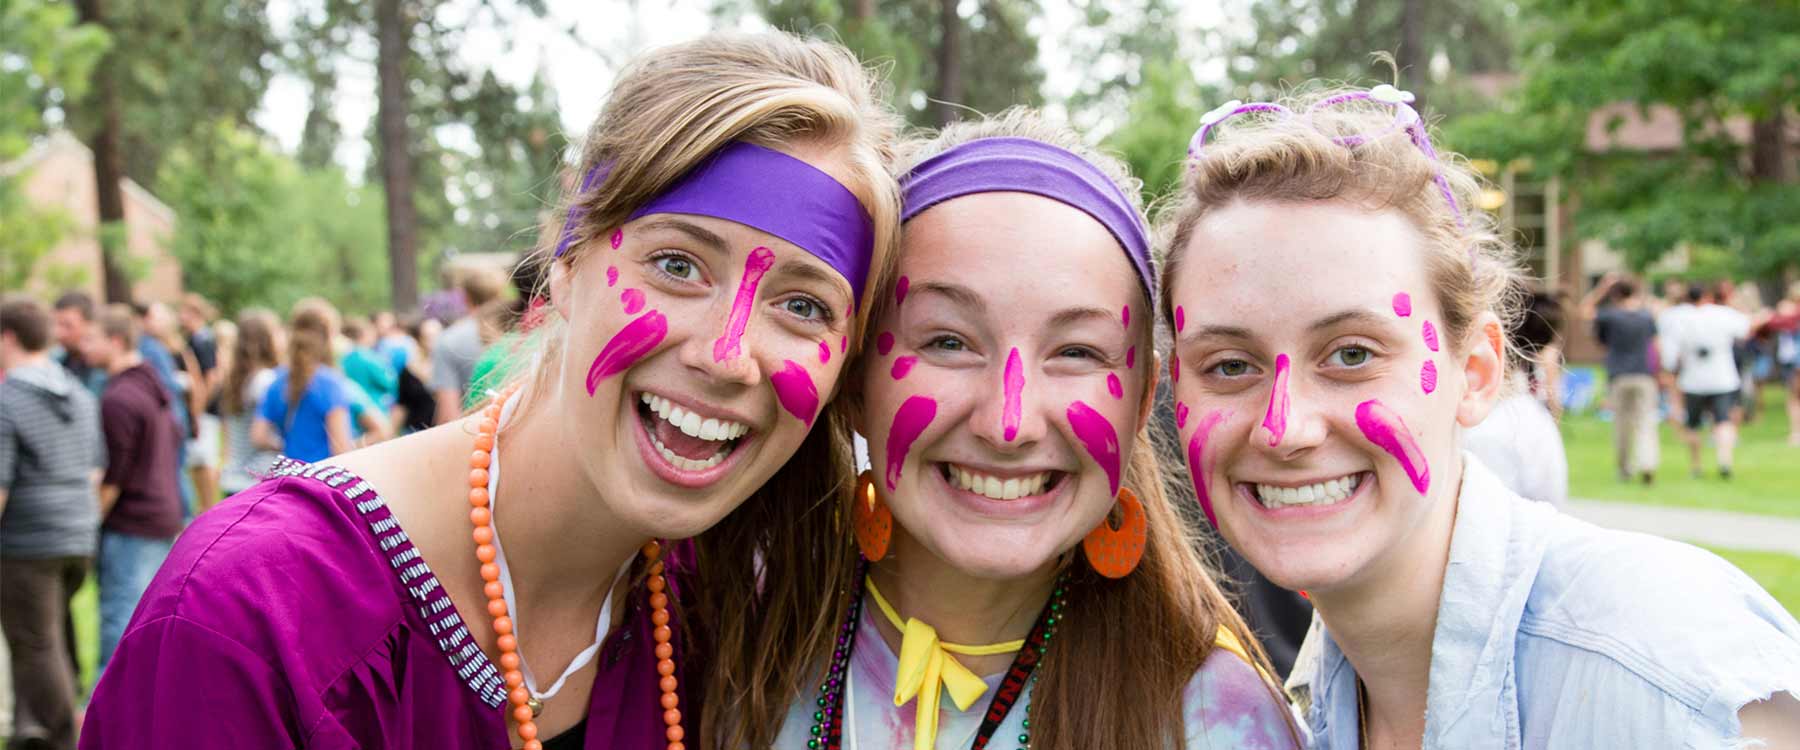 Three students, with headbands and bright face pain, stand close together and smile.